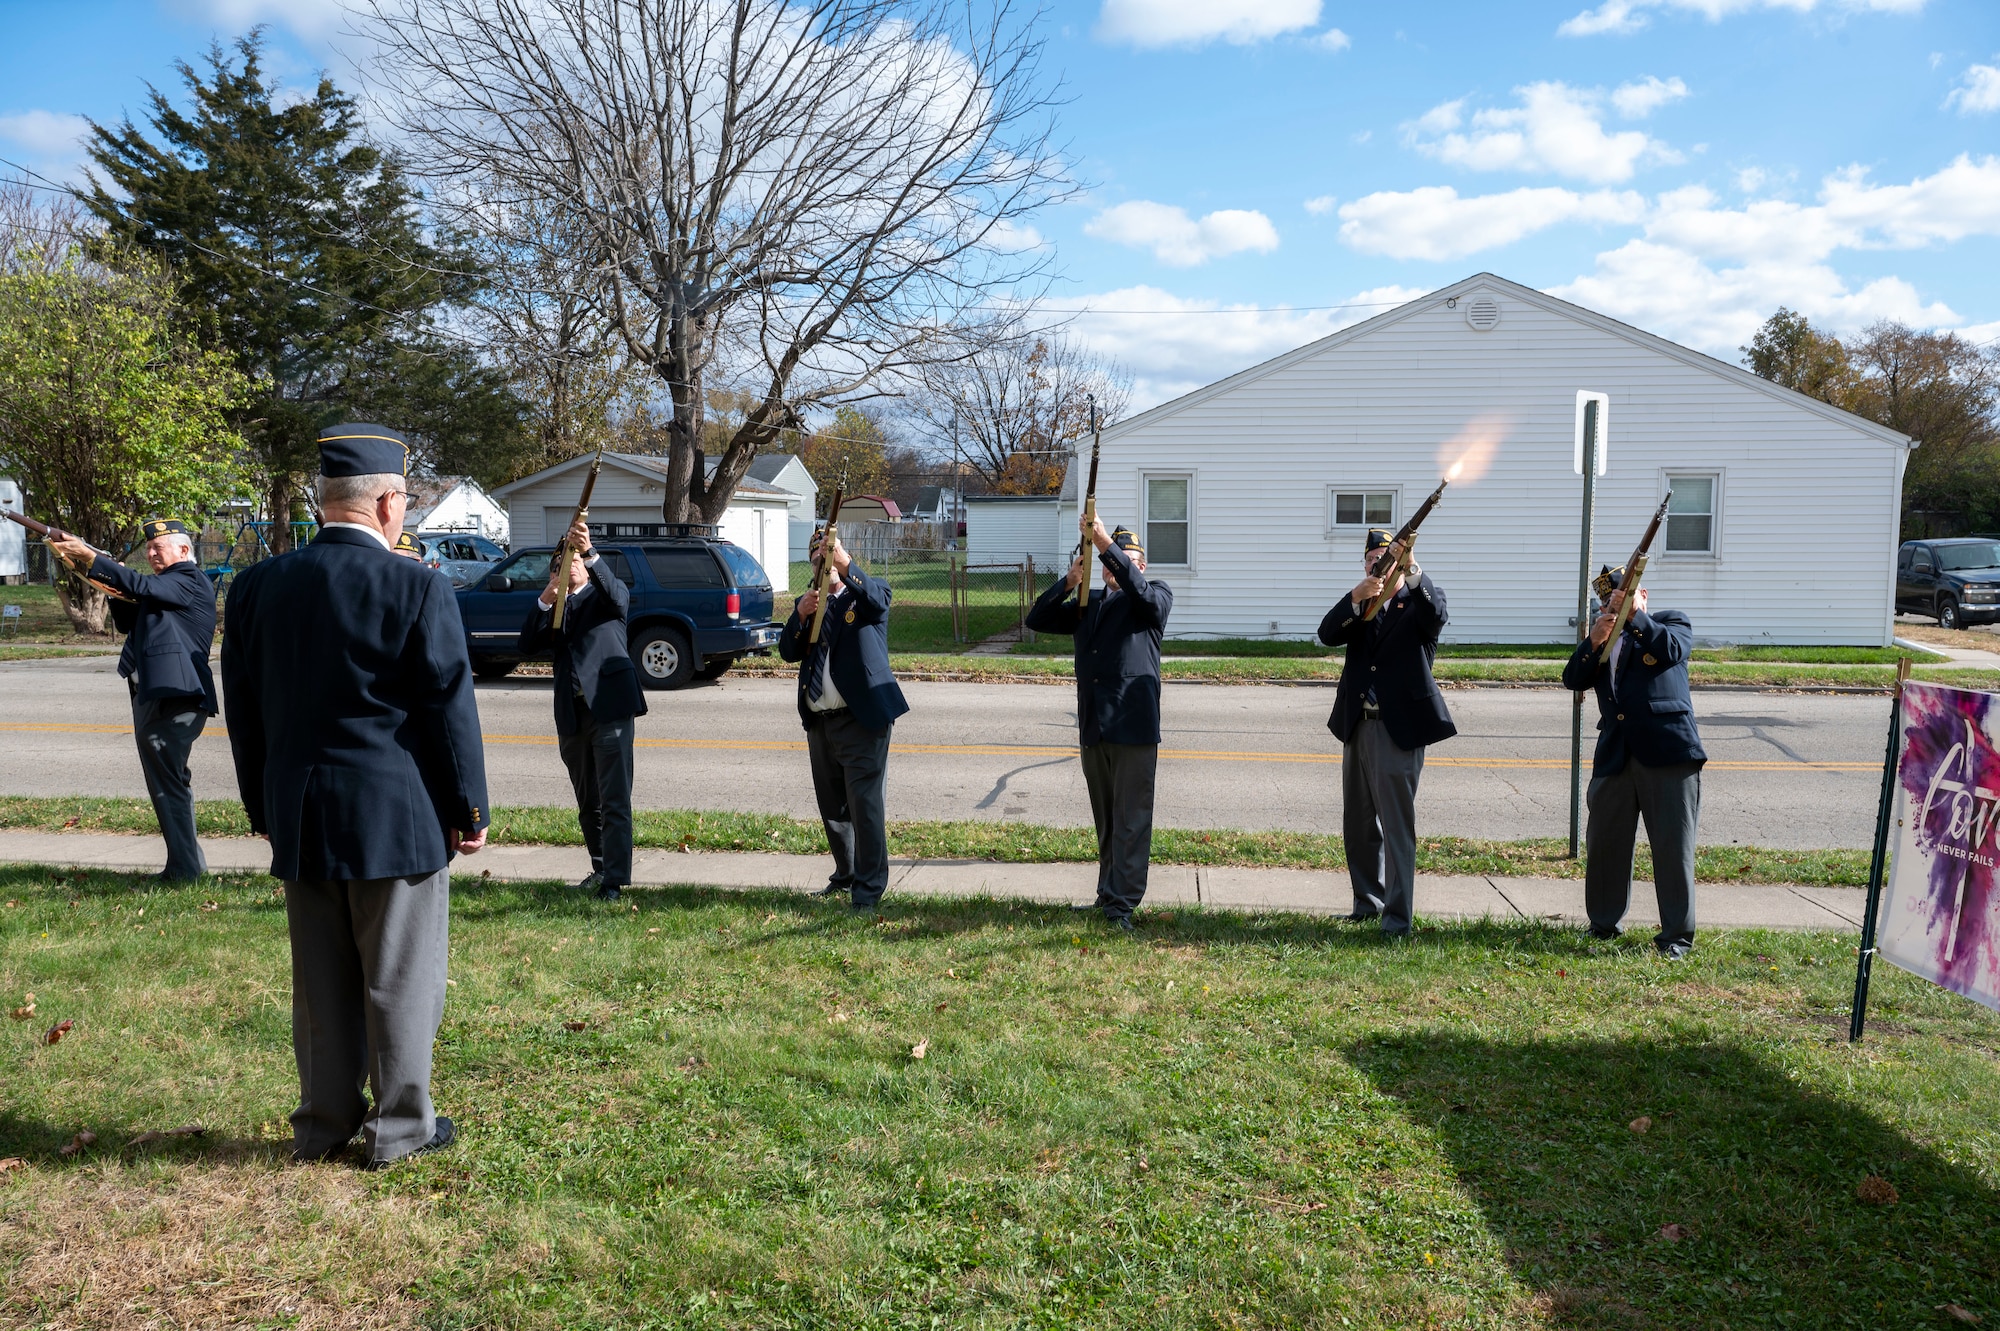 Members of the American Legion Post 526 perform a 21-gun salute during a Veterans Day ceremony at the United Methodist Church in Fairborn, Ohio, Nov. 11, 2023. The custom stems from naval tradition, when a warship would signify its lack of hostile intent by firing its cannons out to sea until all ammunition was spent. (U.S. Air Force photo by Staff Sgt. Mikaley Kline)